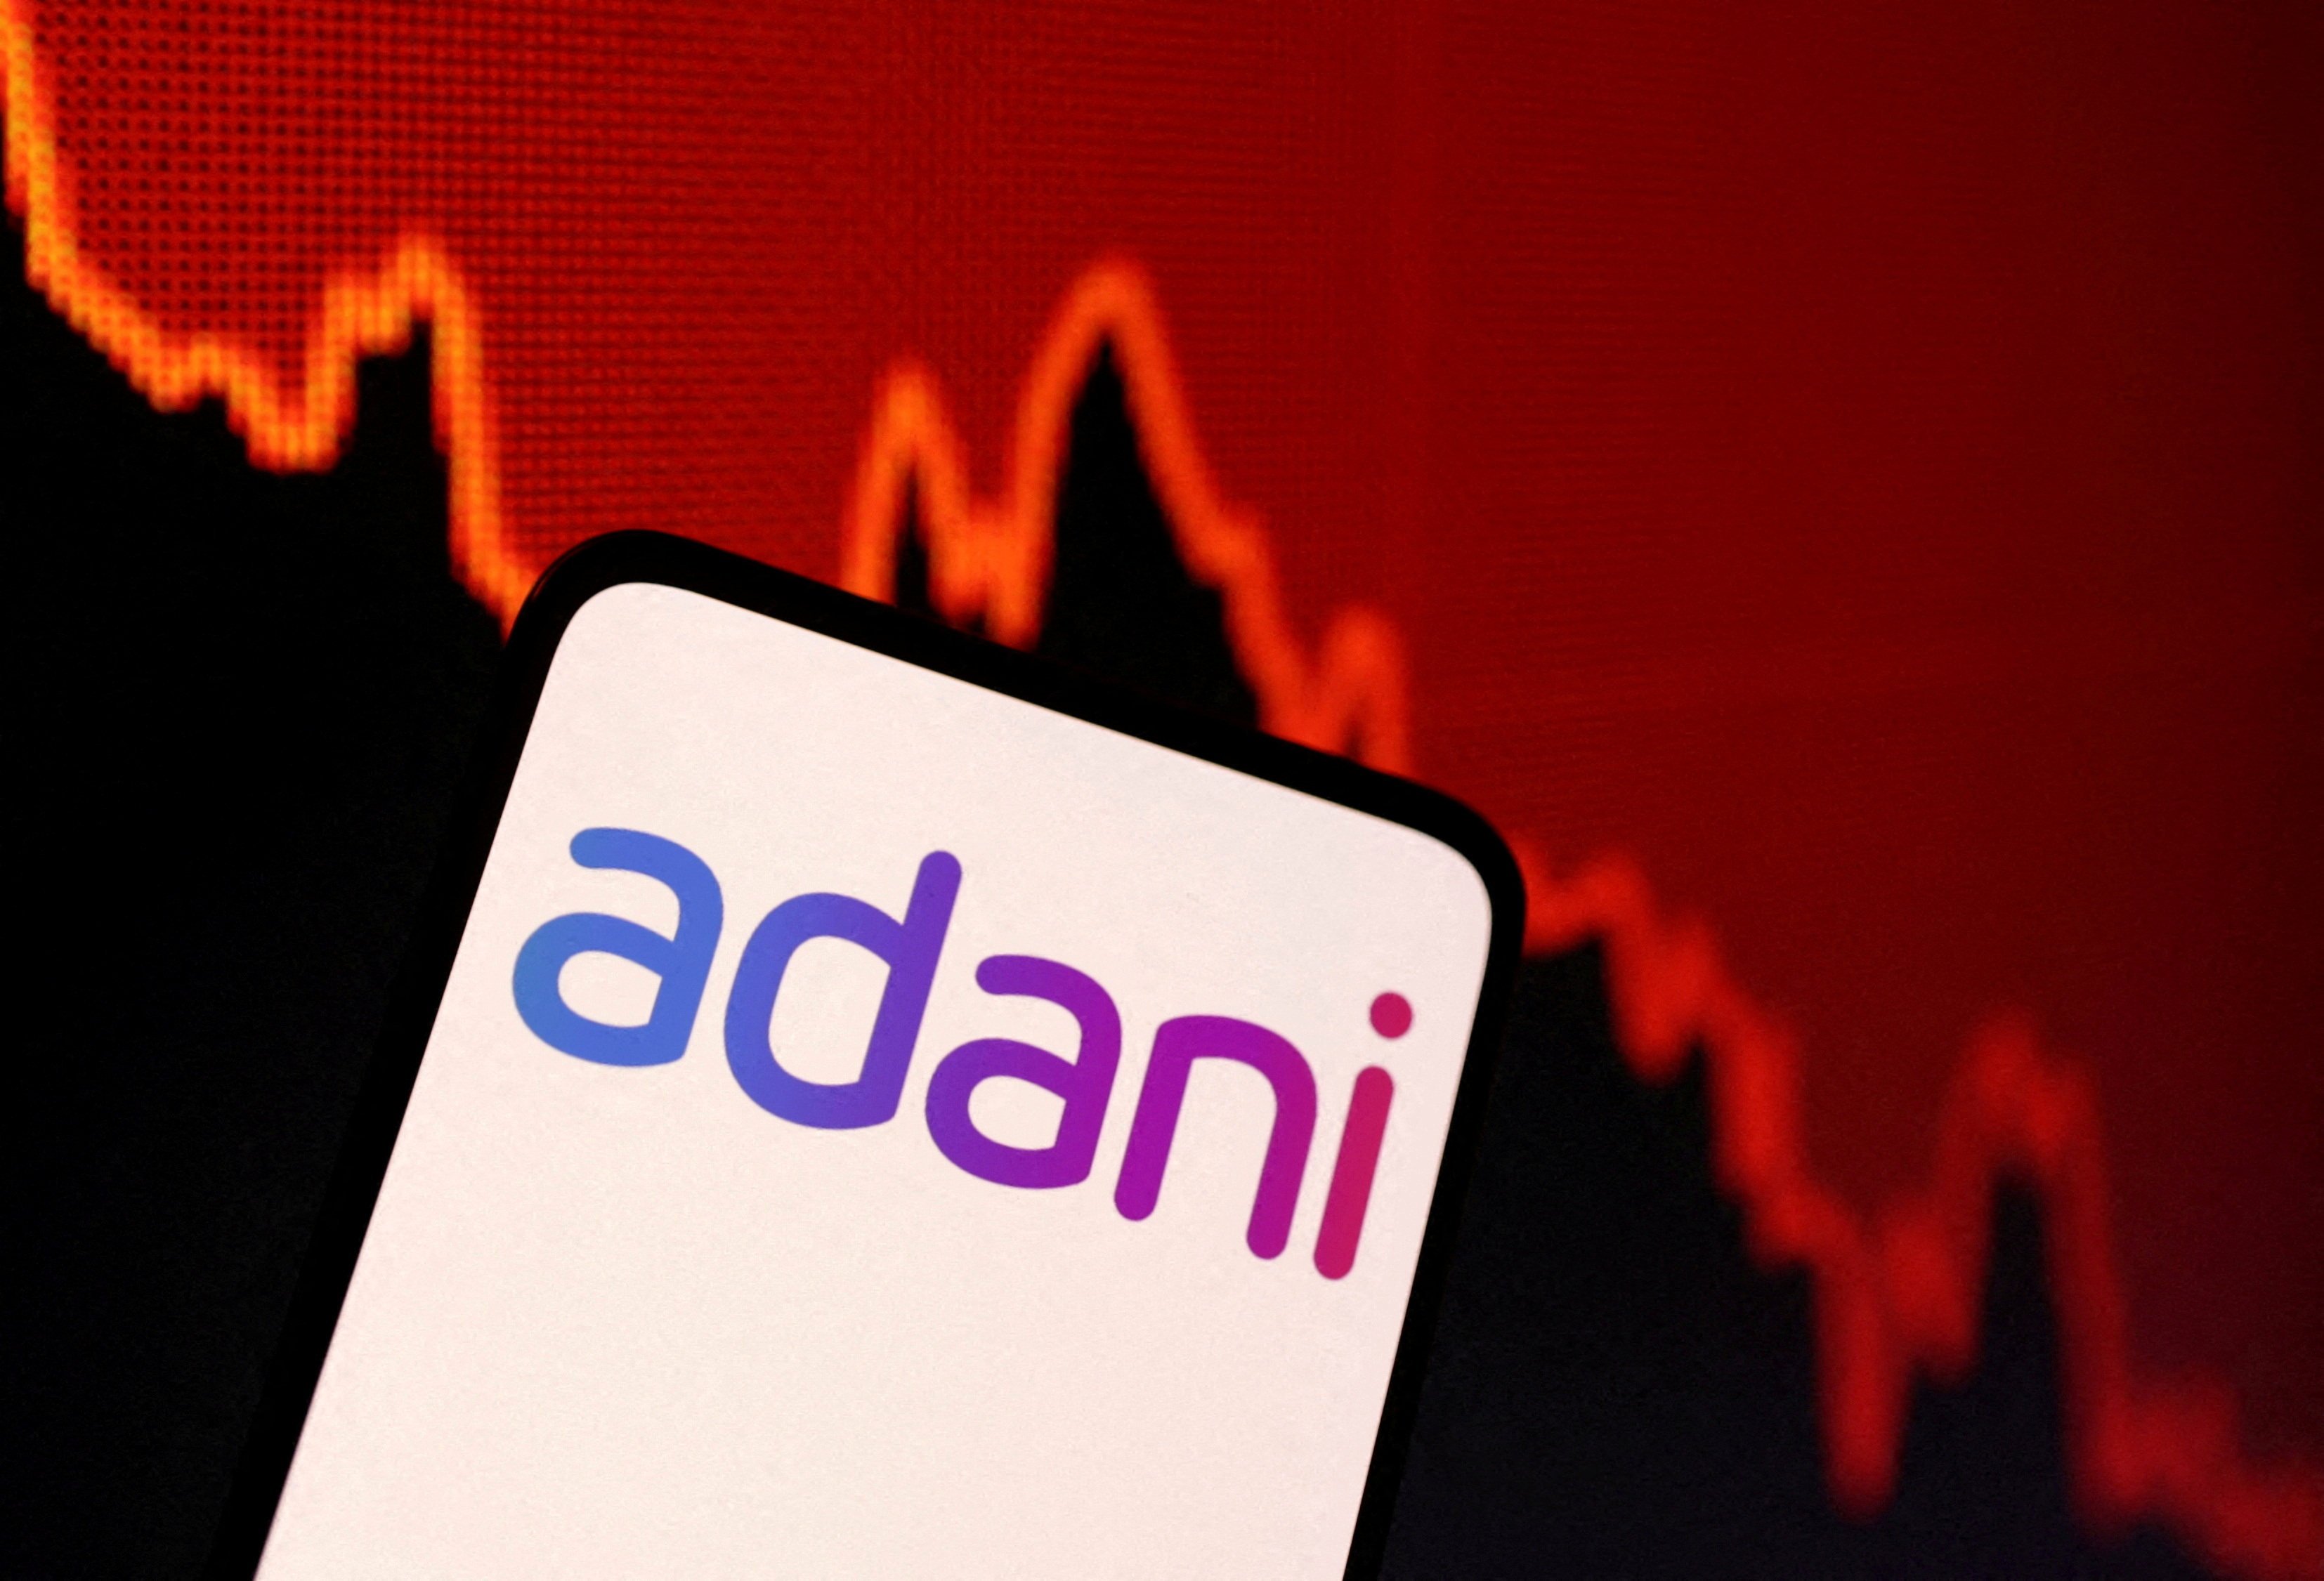 The Adani affair raises broader questions about regulatory standards in India’s markets and could hurt Prime Minister Narendra Modi electorally. Photo: Reuters